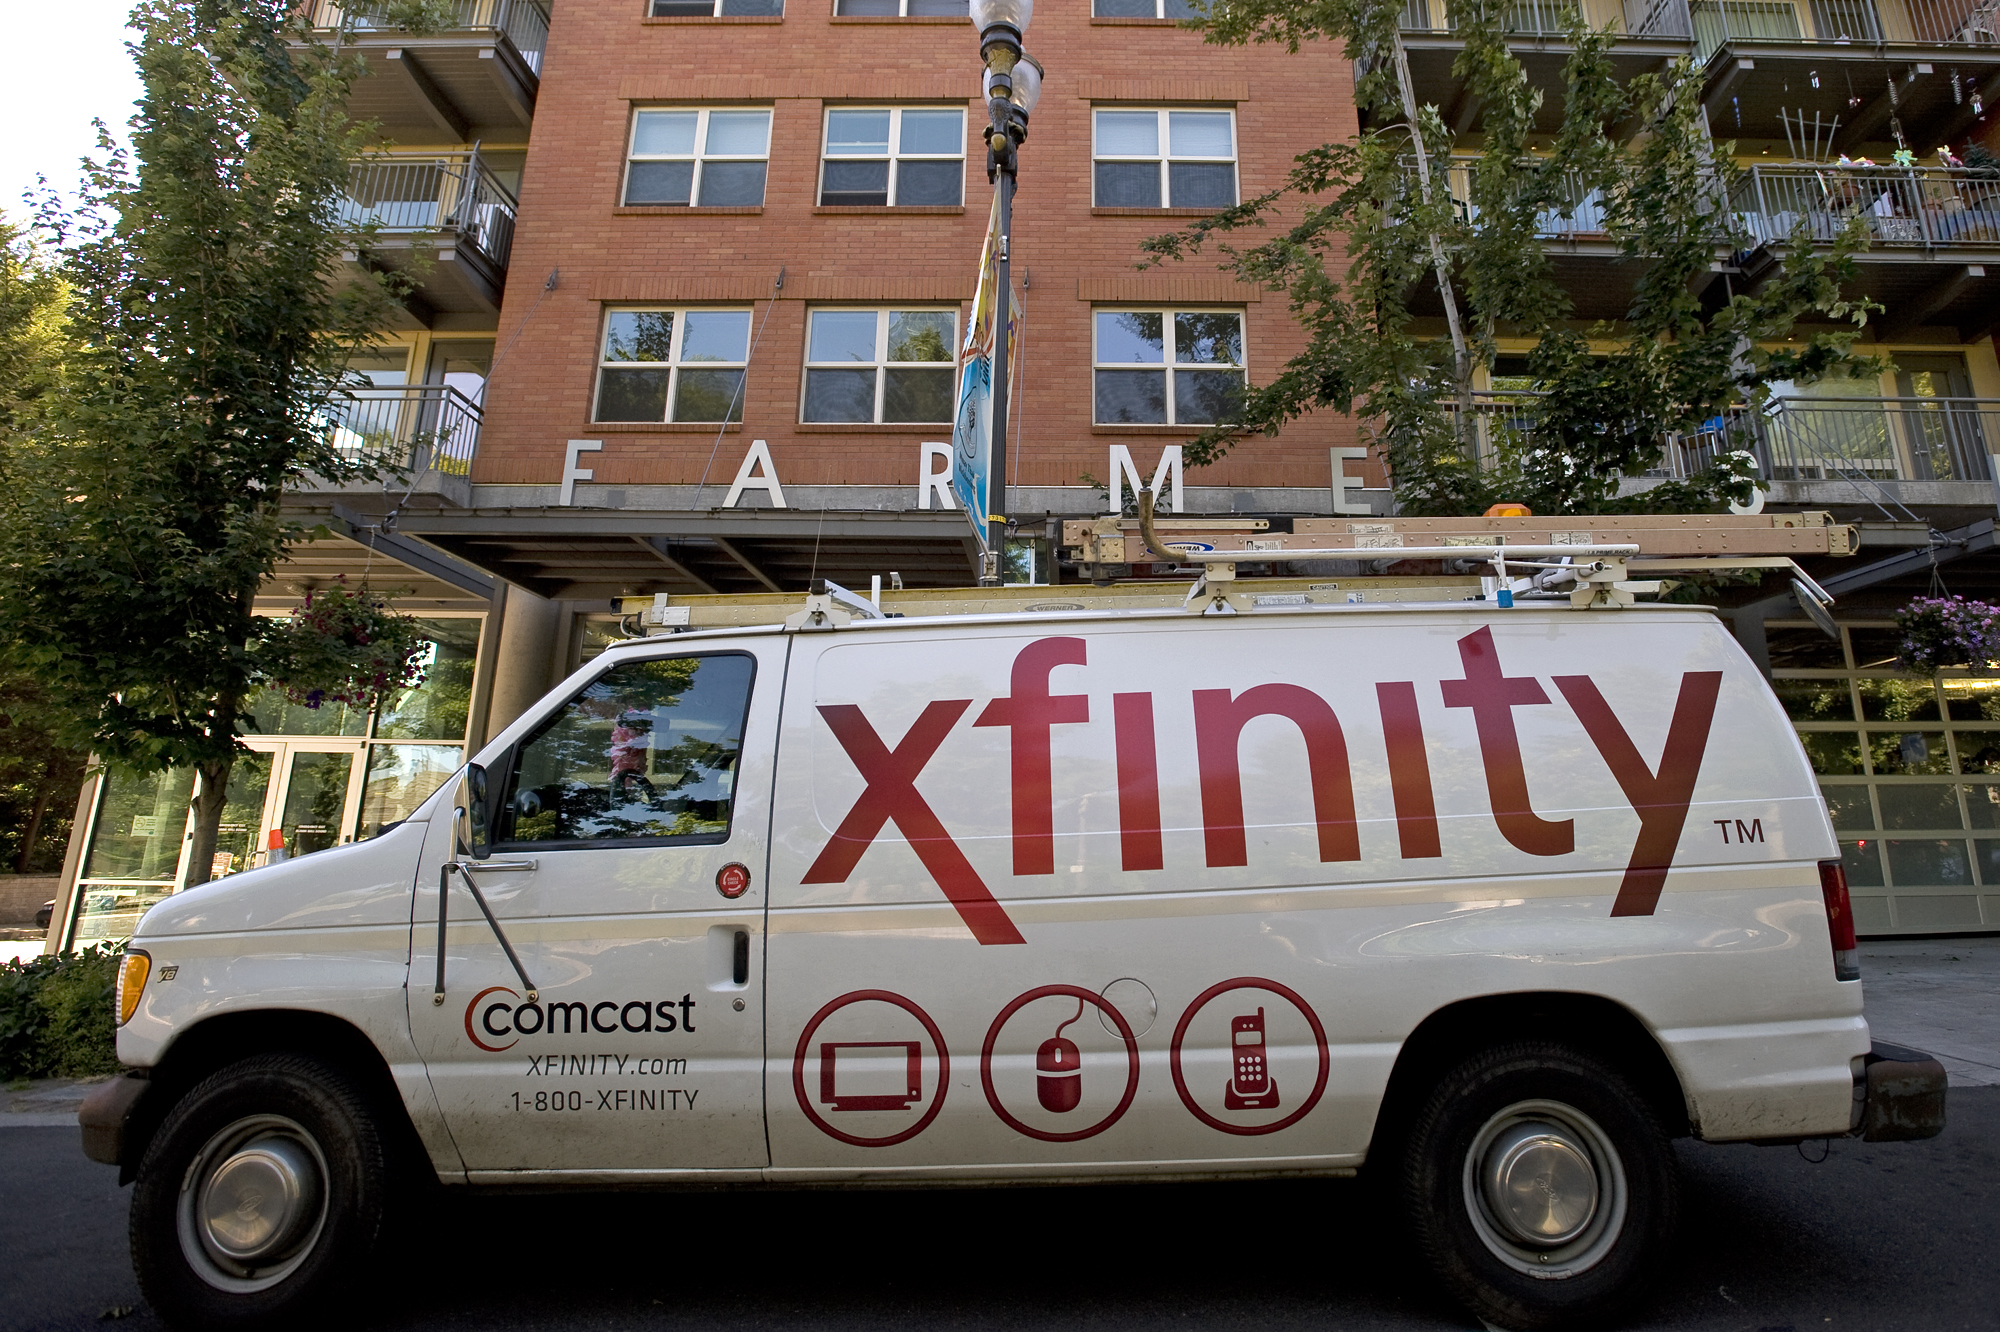 Xfinity truck in front of brick building